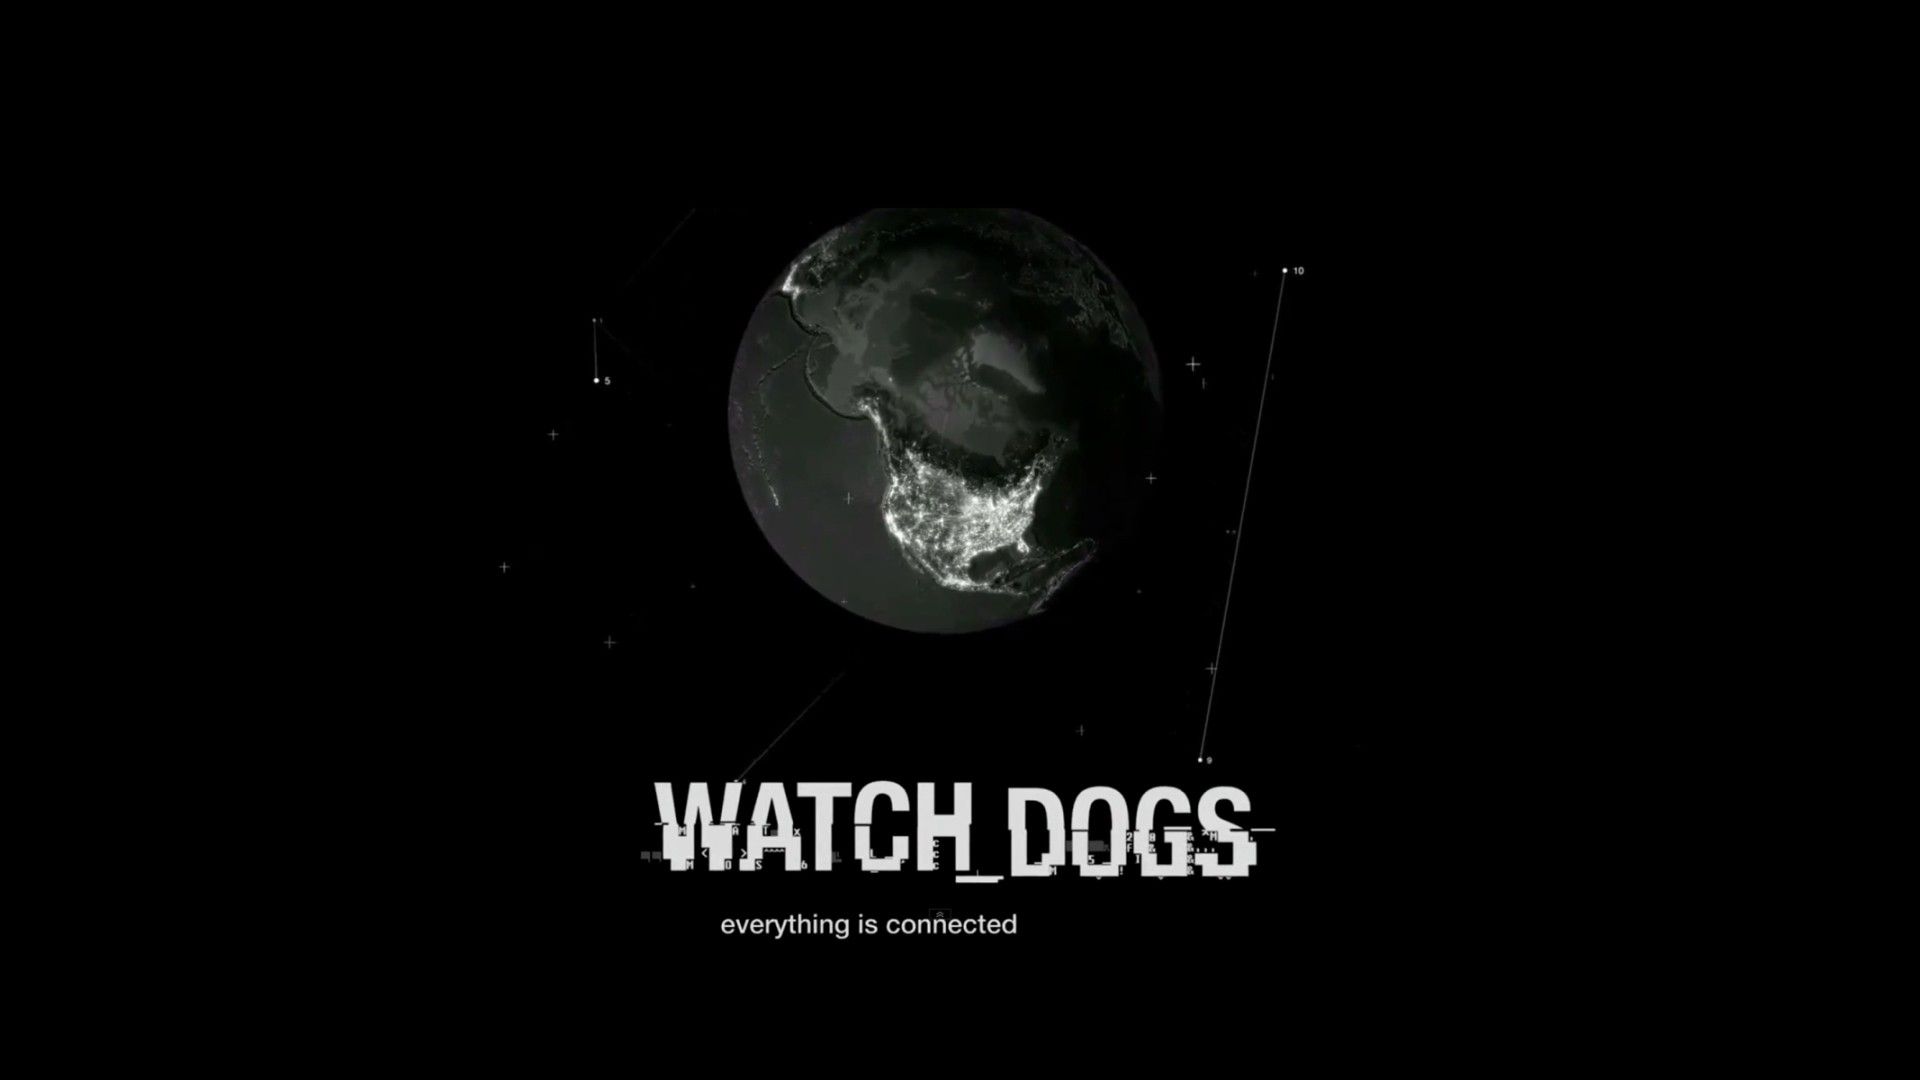 video games, minimalistic, text, Earth, connection, Watch Dogs wallpaper